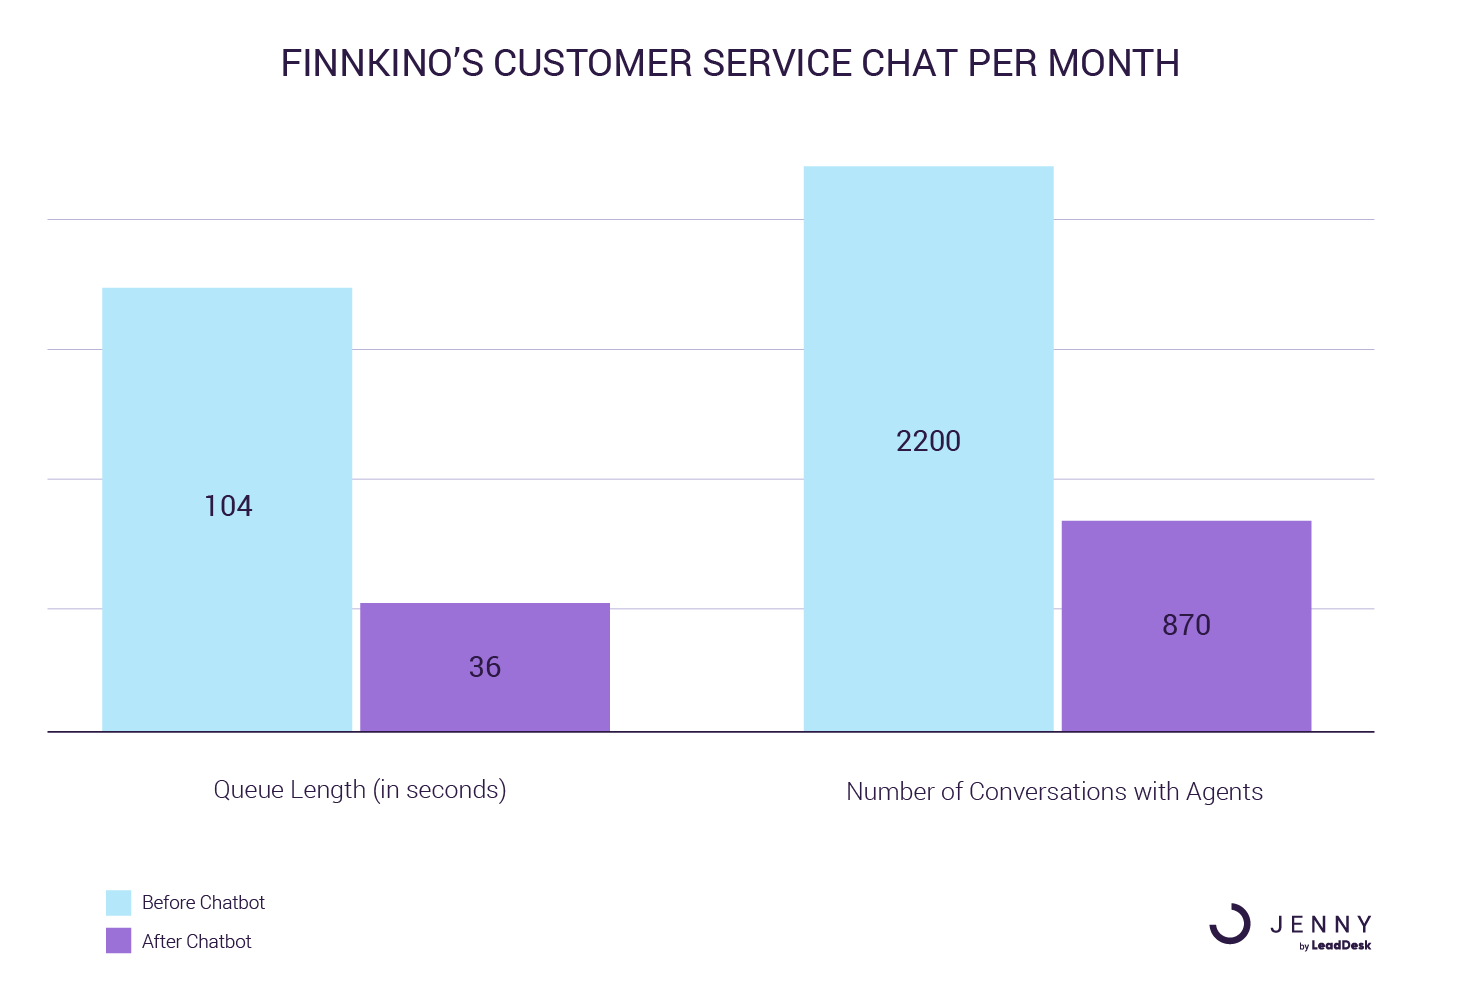 customer service chat improvement per month with chatbots in media and entertainment GetJenny